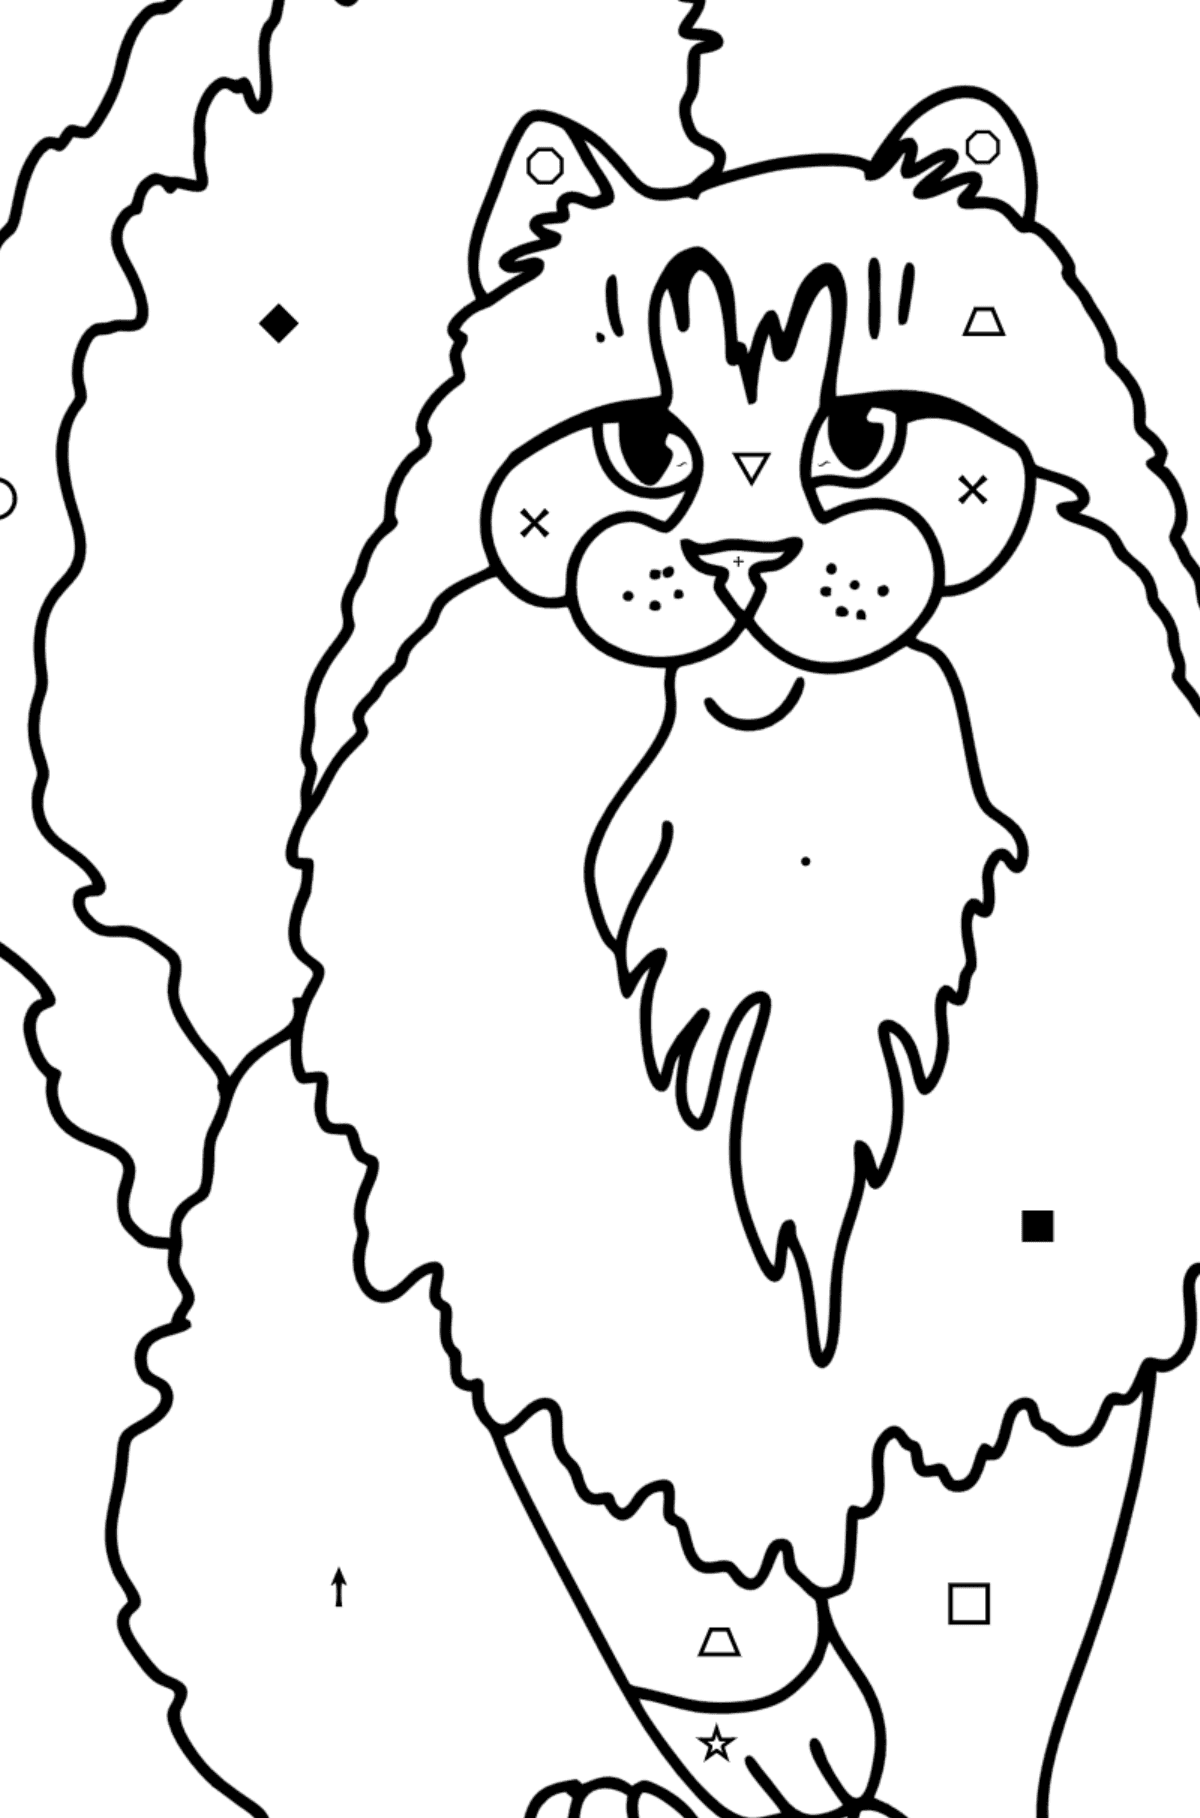 Norwegian Forest Cat coloring page - Coloring by Symbols and Geometric Shapes for Kids